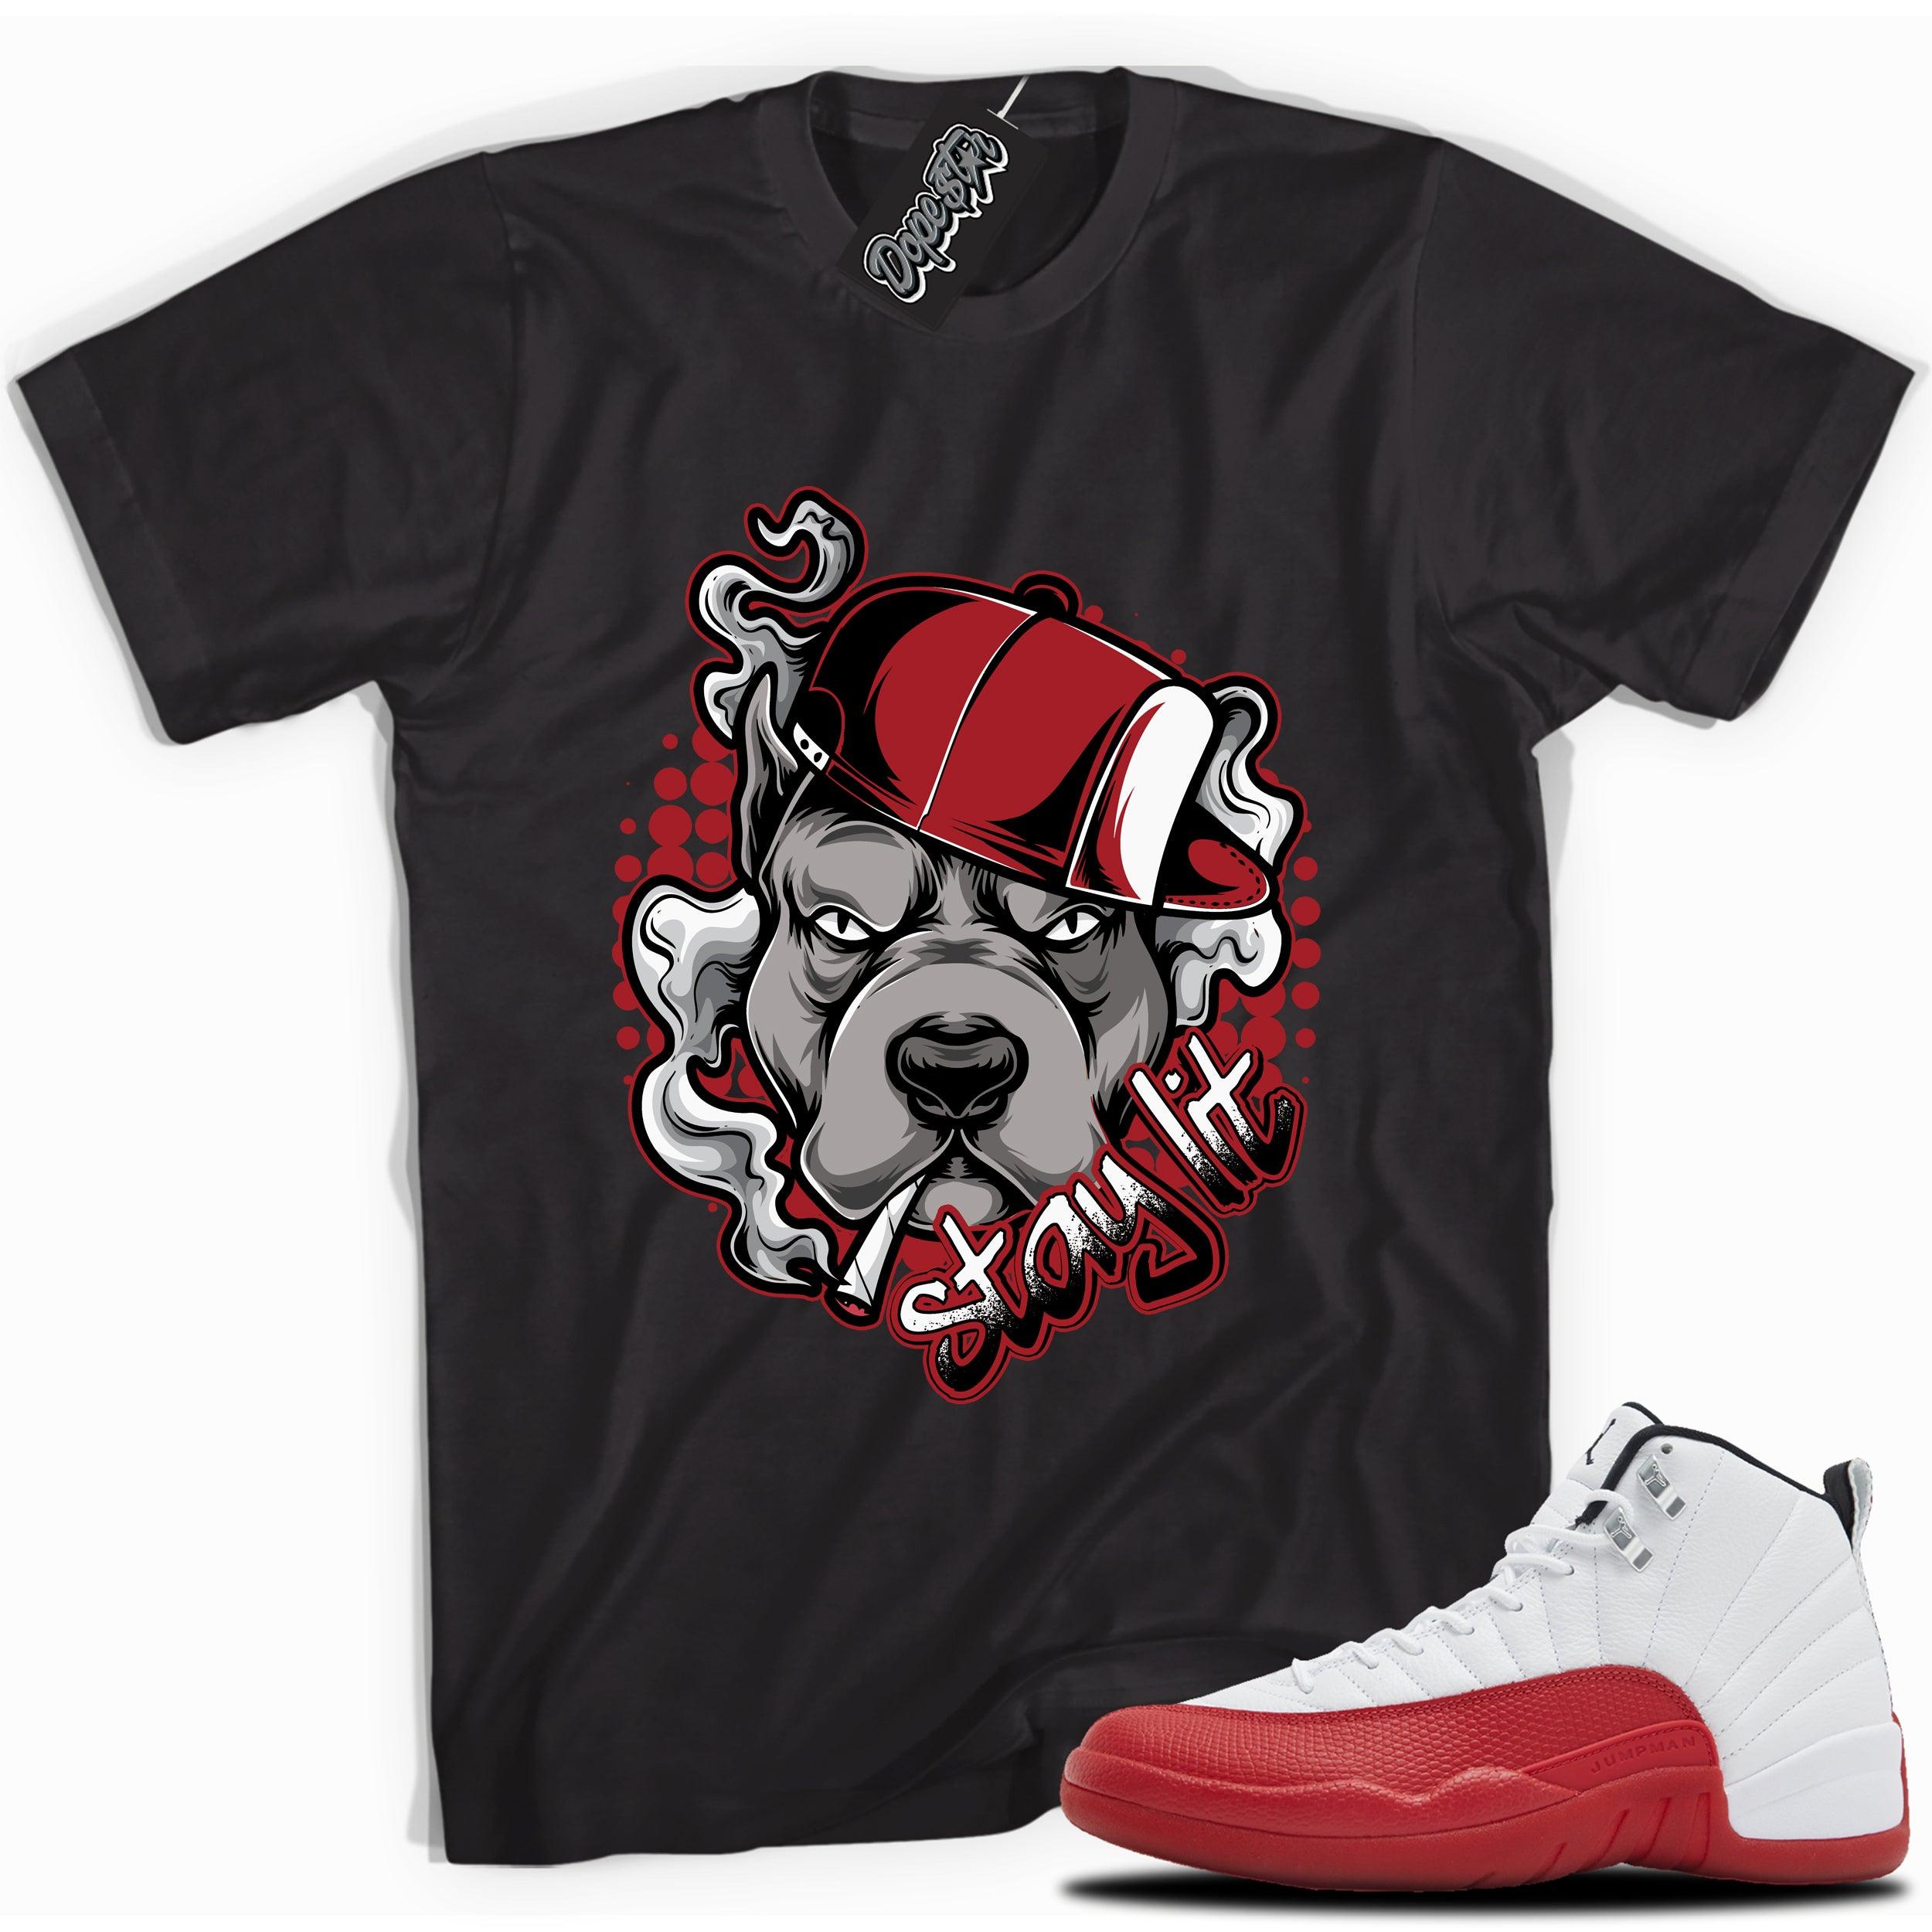 Cool Black graphic tee with “STAY LIT” print, that perfectly matches Air Jordan 12 Retro Cherry Red 2023 red and white sneakers 